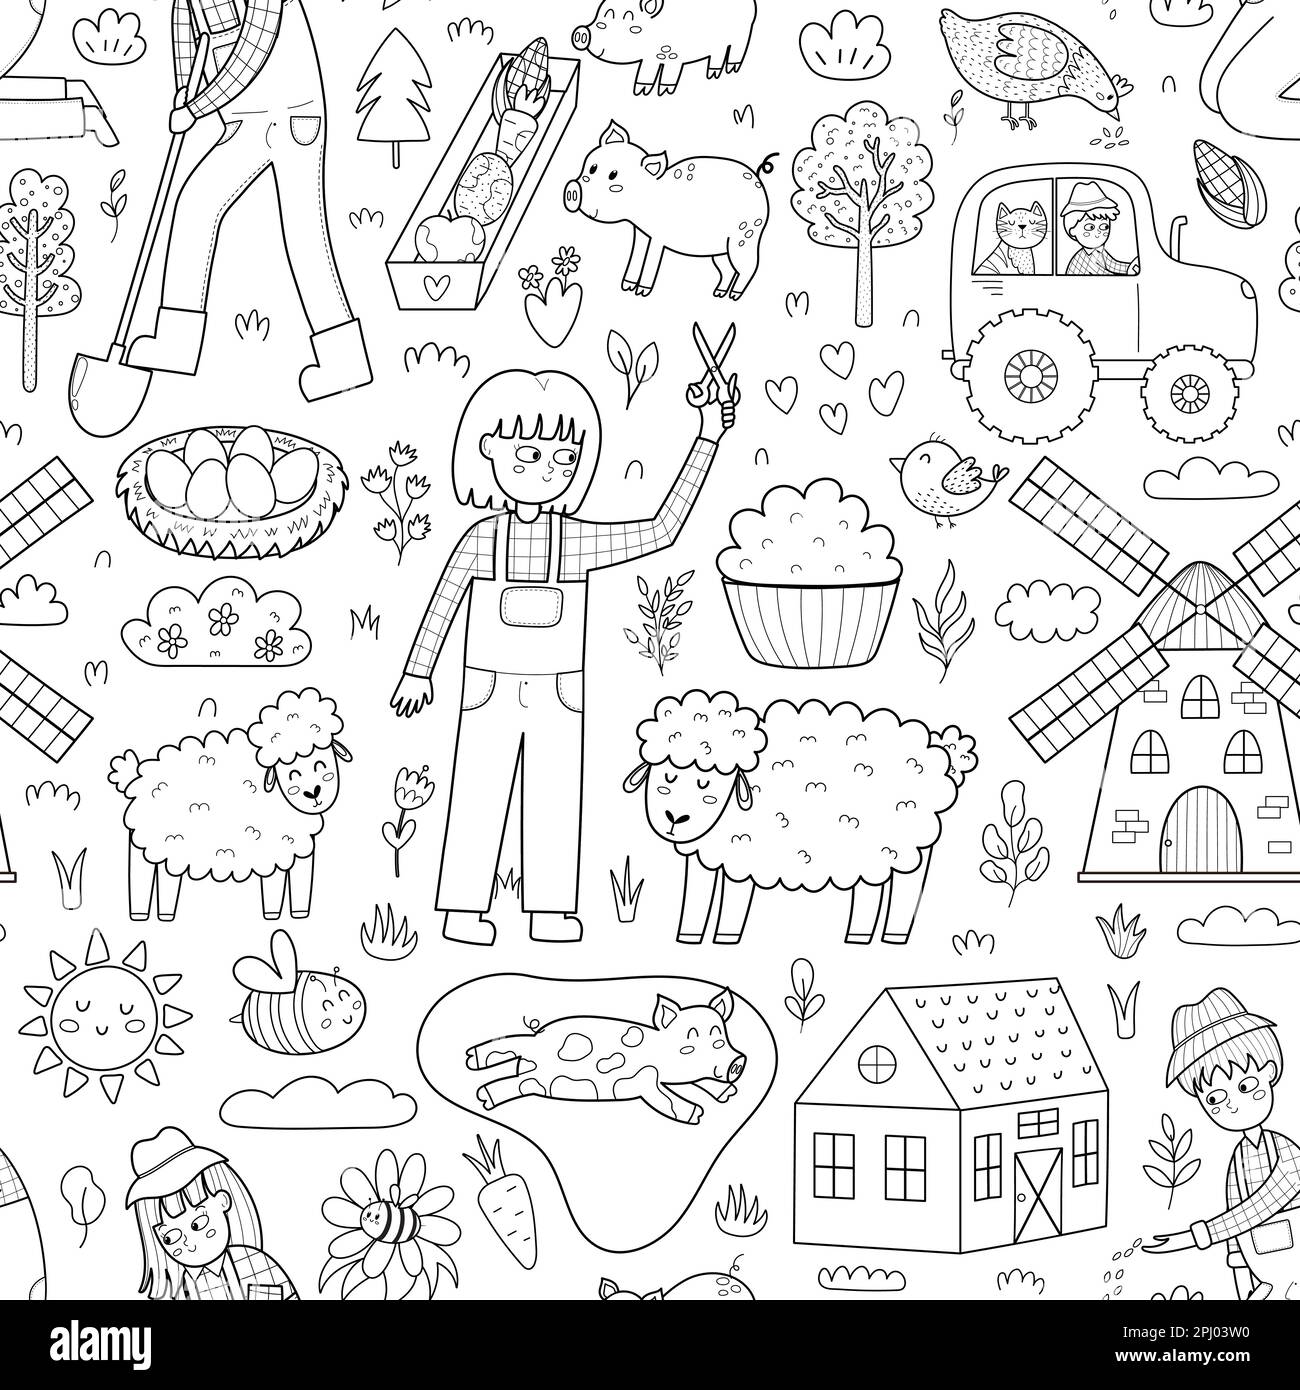 Cute black and white seamless pattern with farm animals and kids farmers Stock Vector